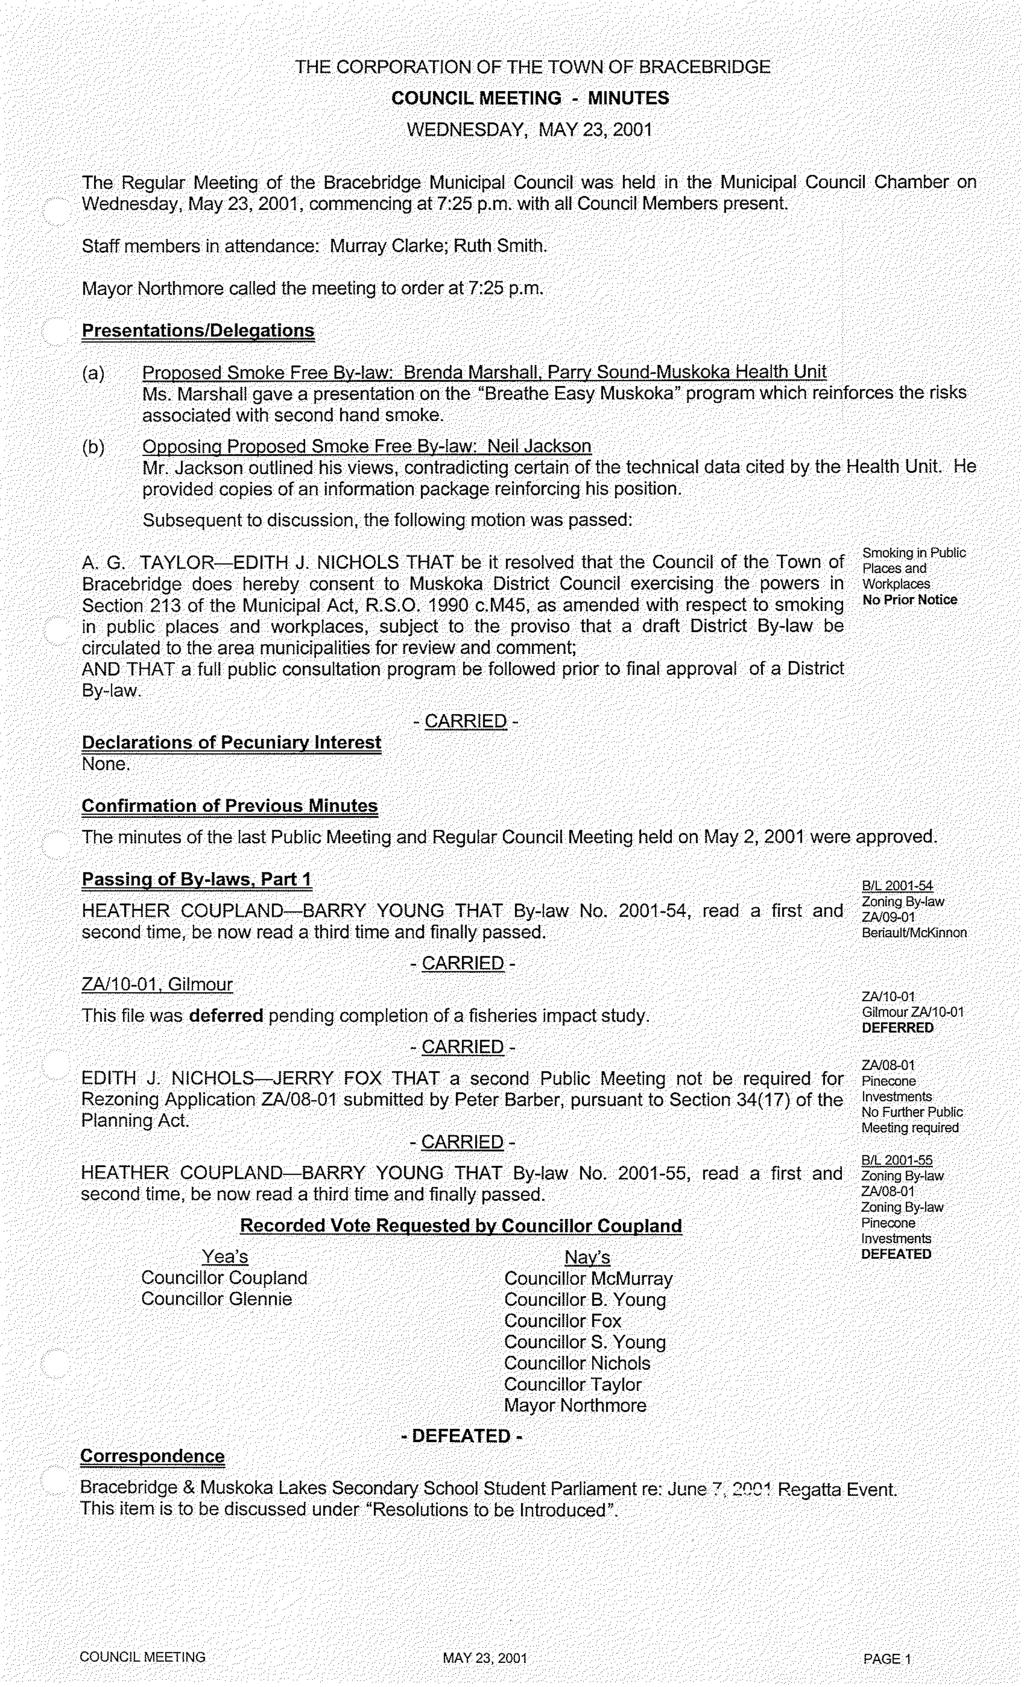 THE CORPORATION OF THE TOWN OF BRACEBRIDGE COUNCIL MEETING - MINUTES WEDNESDAY, MAY 23,2001 The Regular Meeting of the Bracebridge Municipal Council was held in the Municipal Council Chamber on